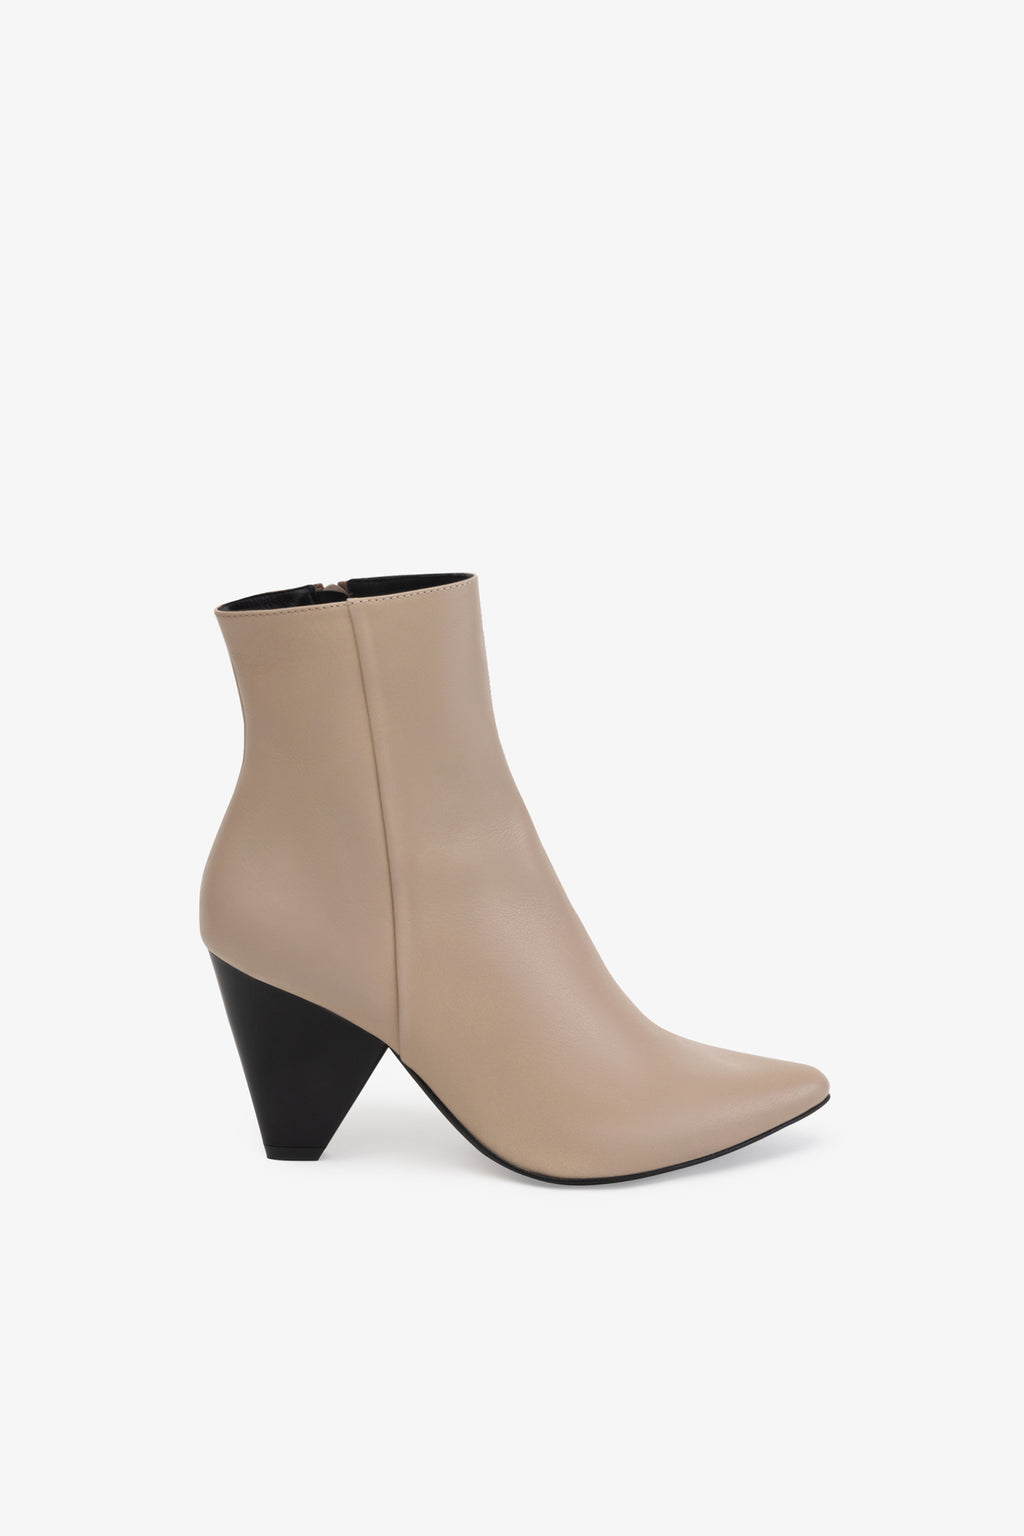 Ladies Taupe Cubed Heel Ruched Ankle Boot - Lolita